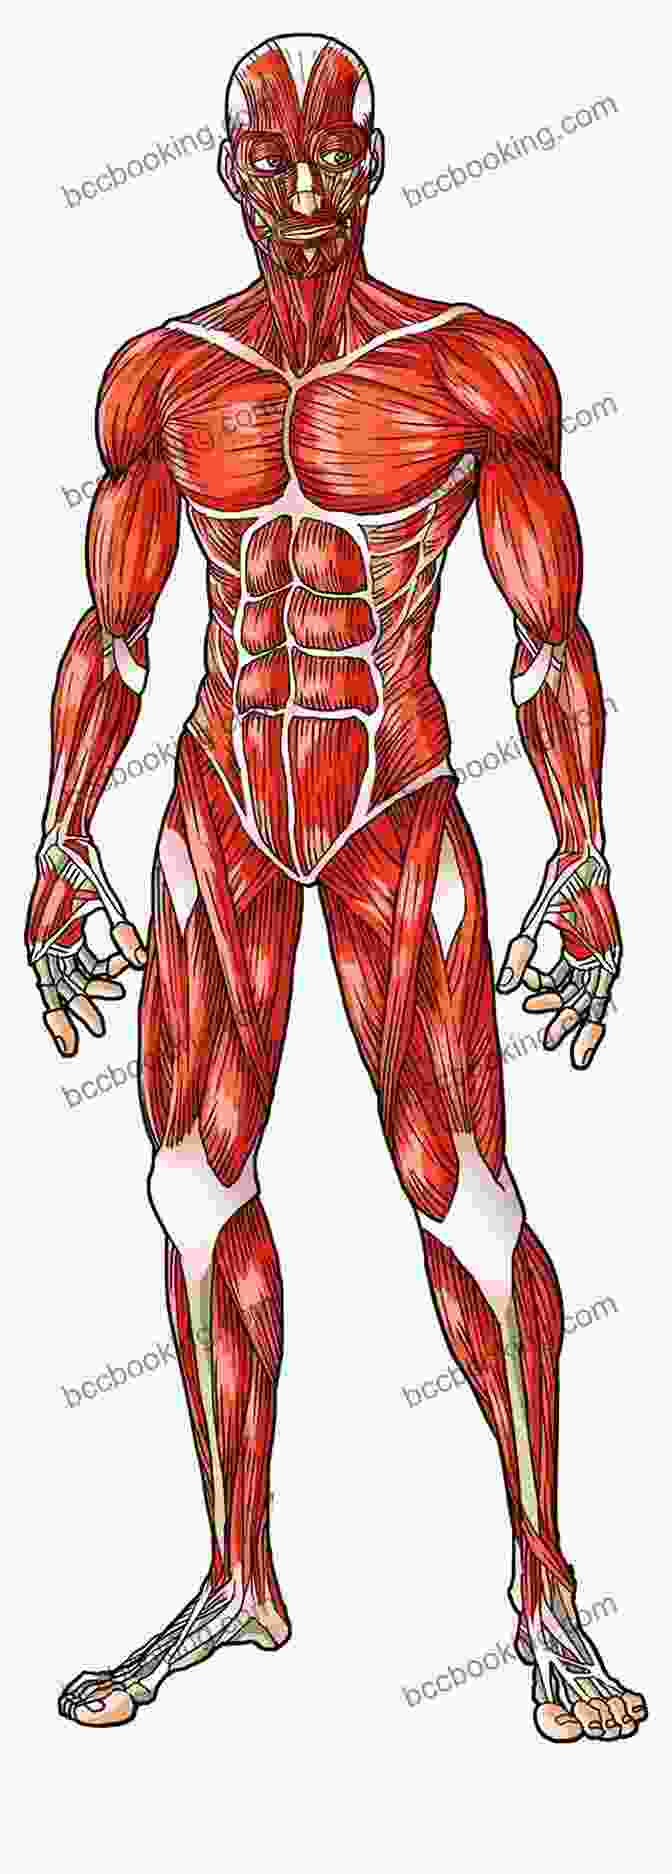 Image Of The Human Muscular System Anatomy And Physiology Quick Review For Premed Student (Quick Review Notes)